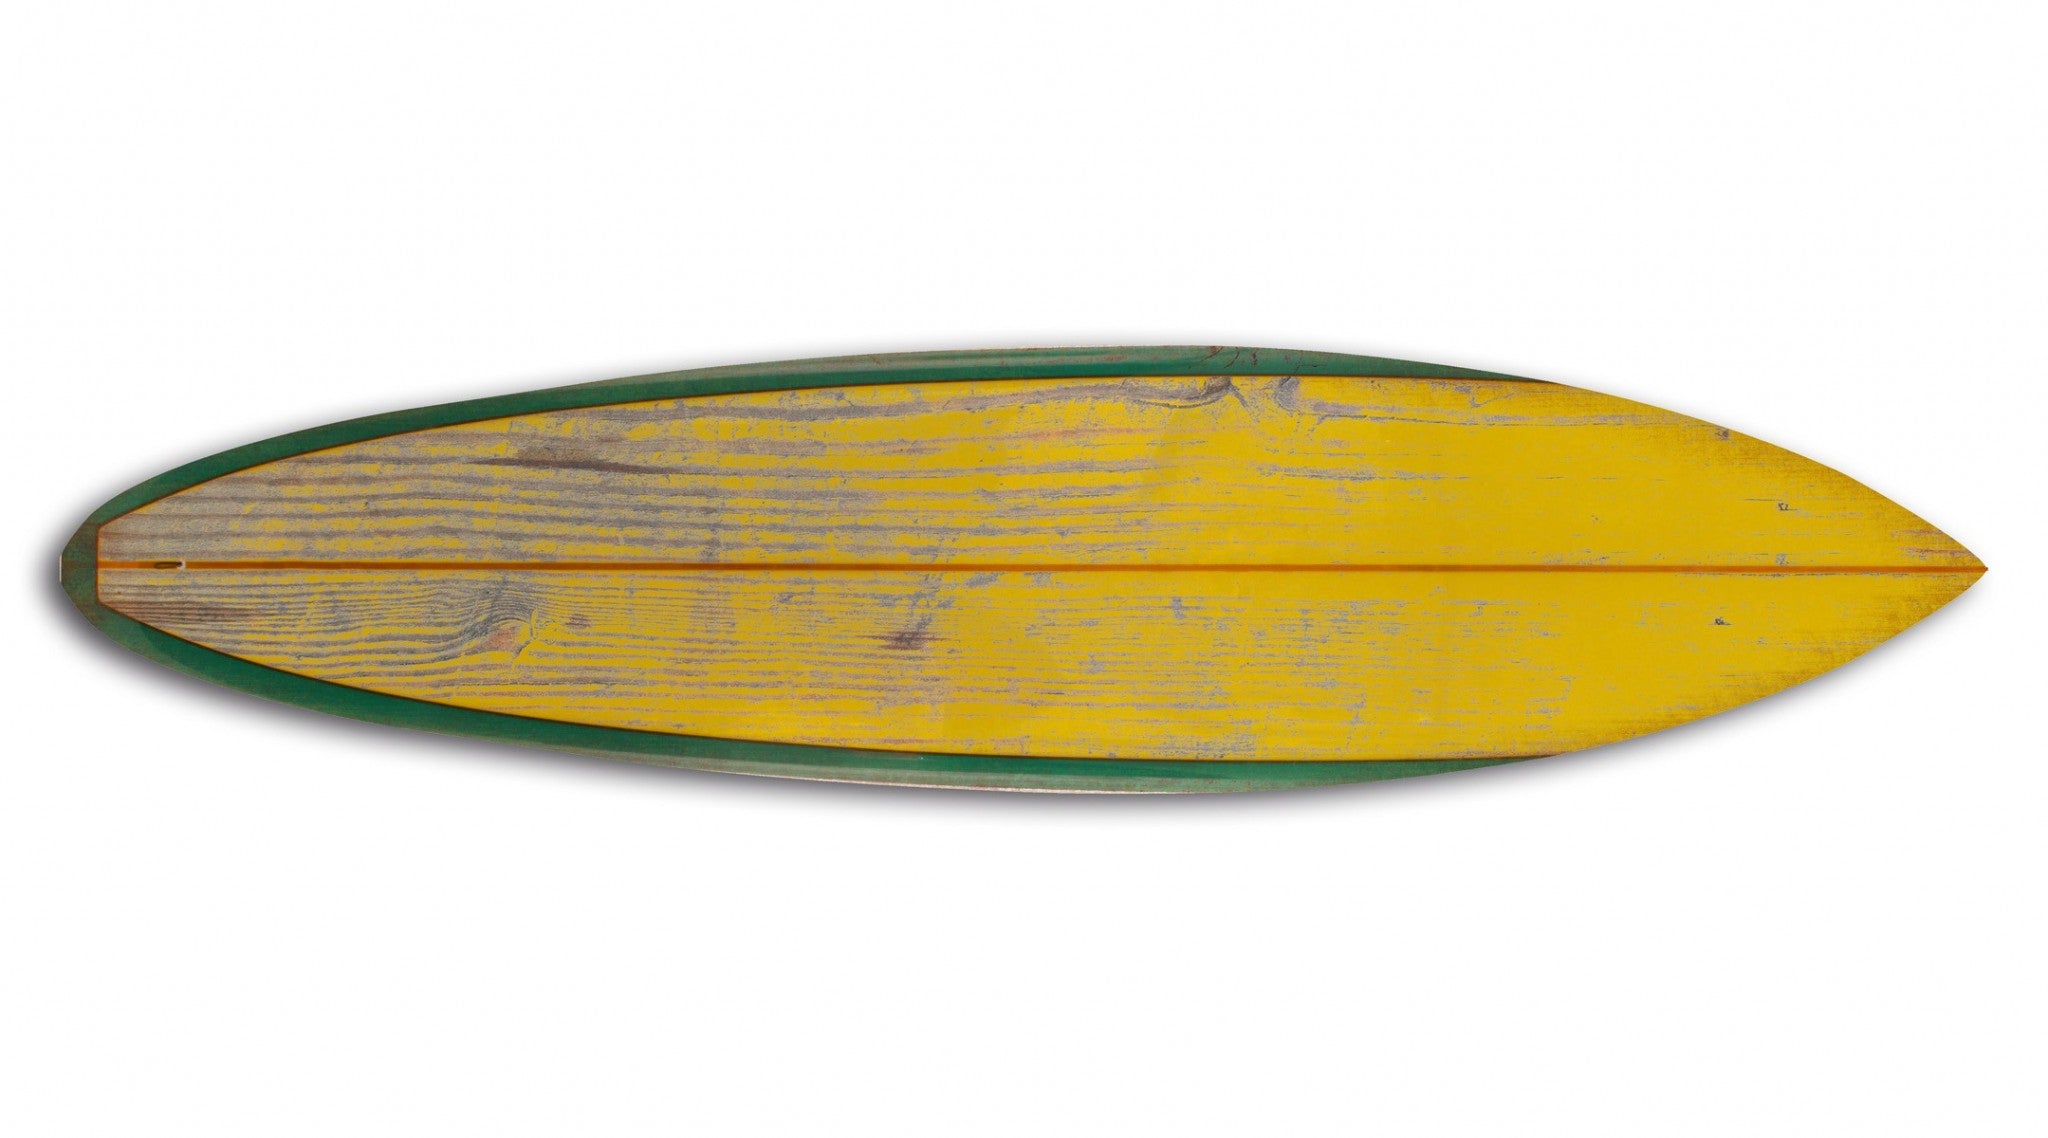 76" X 18" X 1" Distressed And Rustic Yellow Surfboard Wood Panel Wall Art